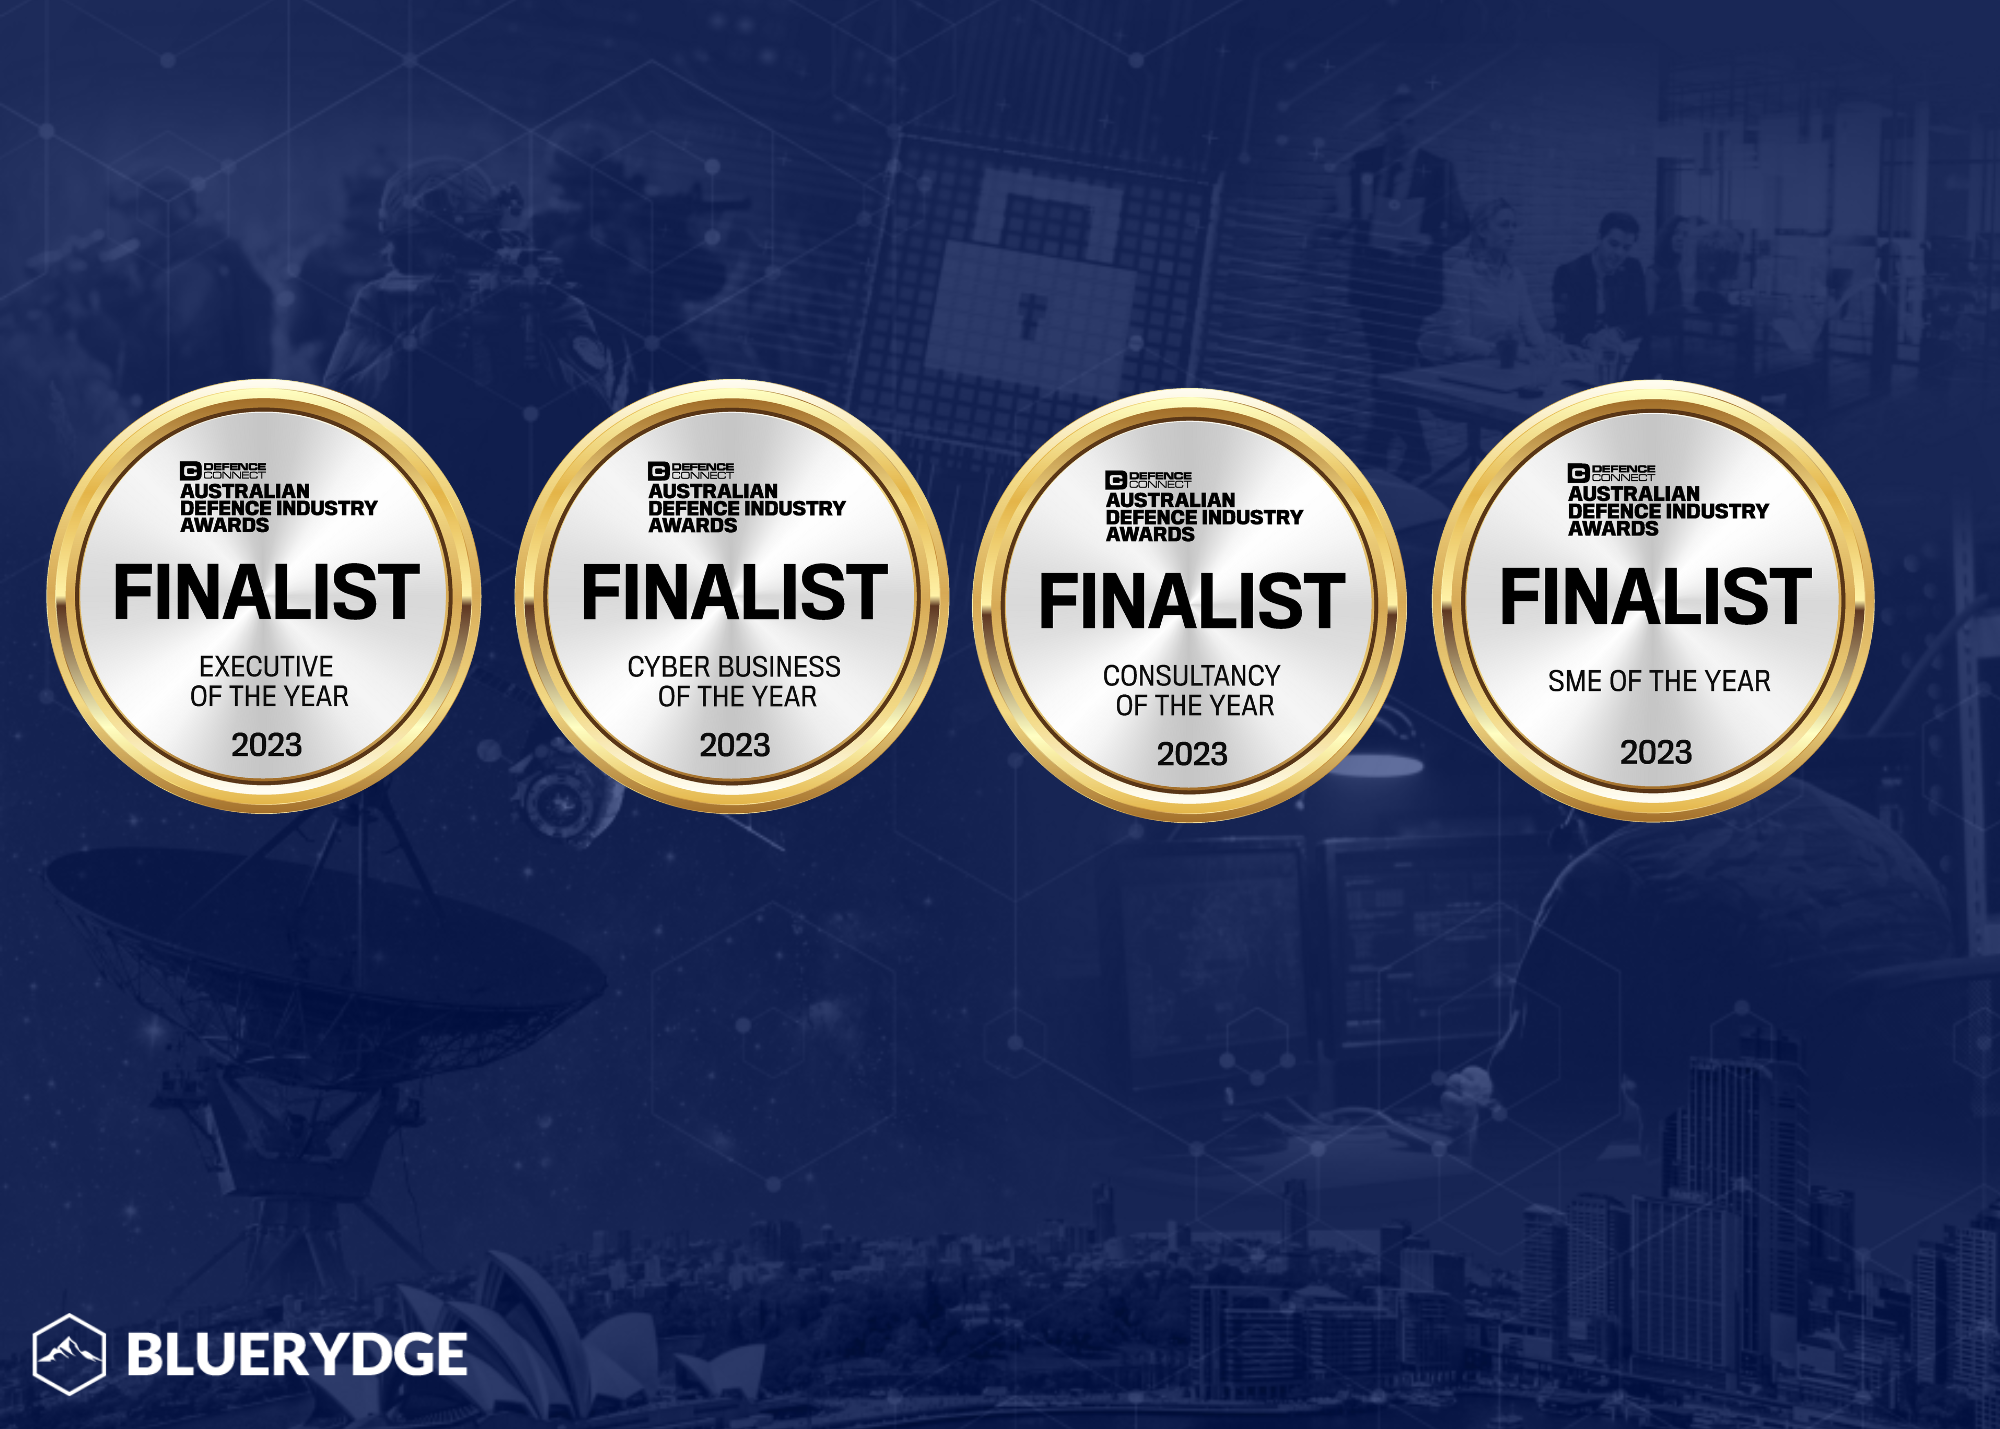 Bluerydge is Finalist at the 2023 Australian Defence Industry Awards